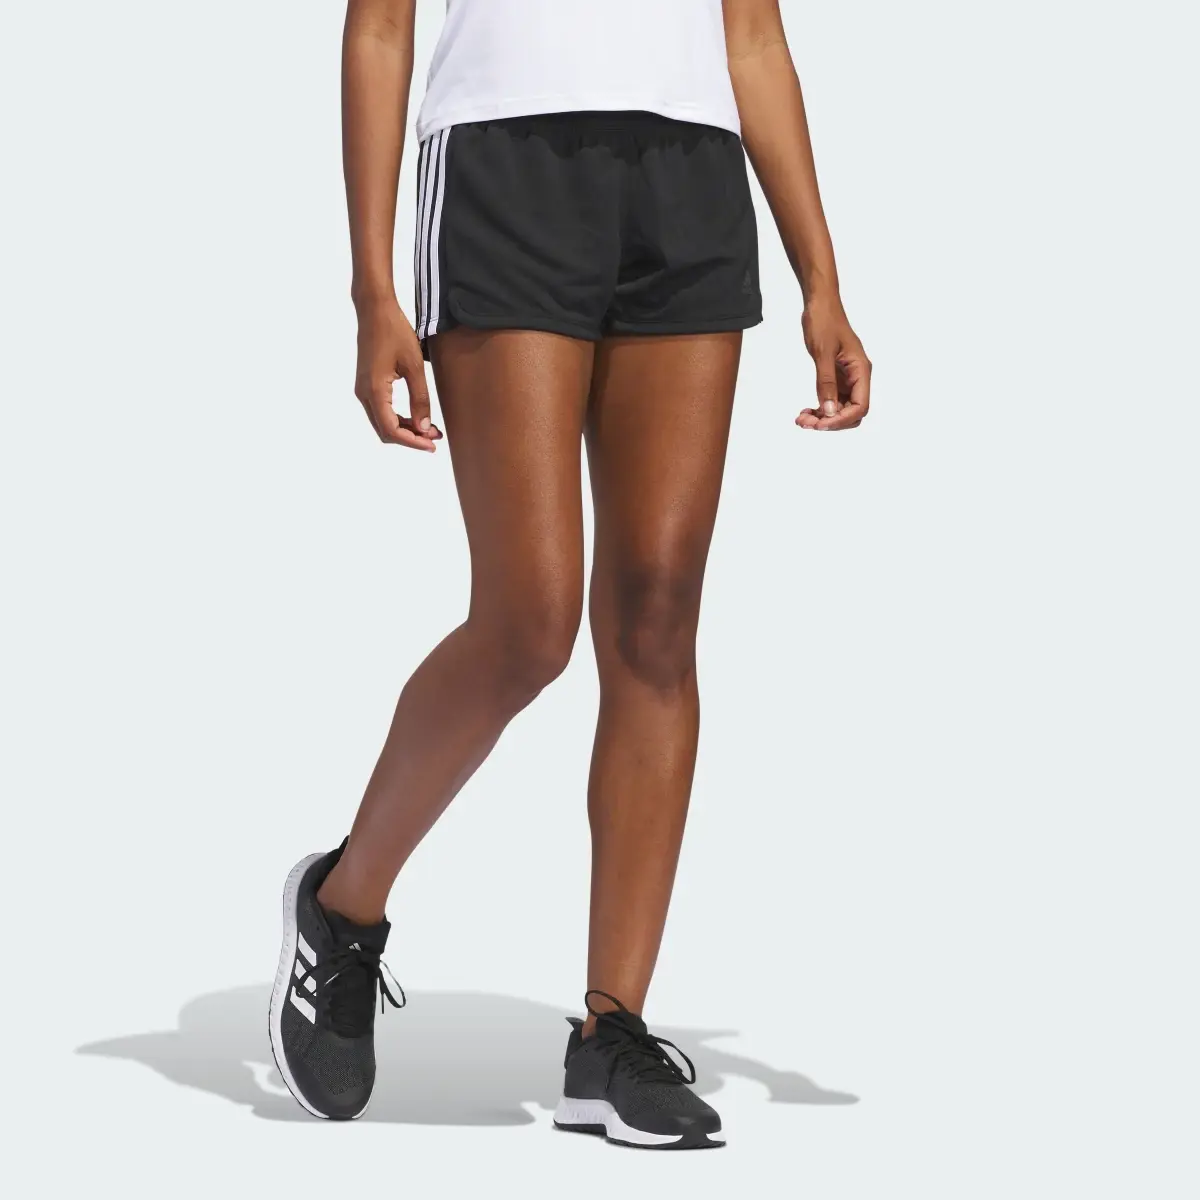 Adidas Pacer 3-Stripes Knit Shorts. 3